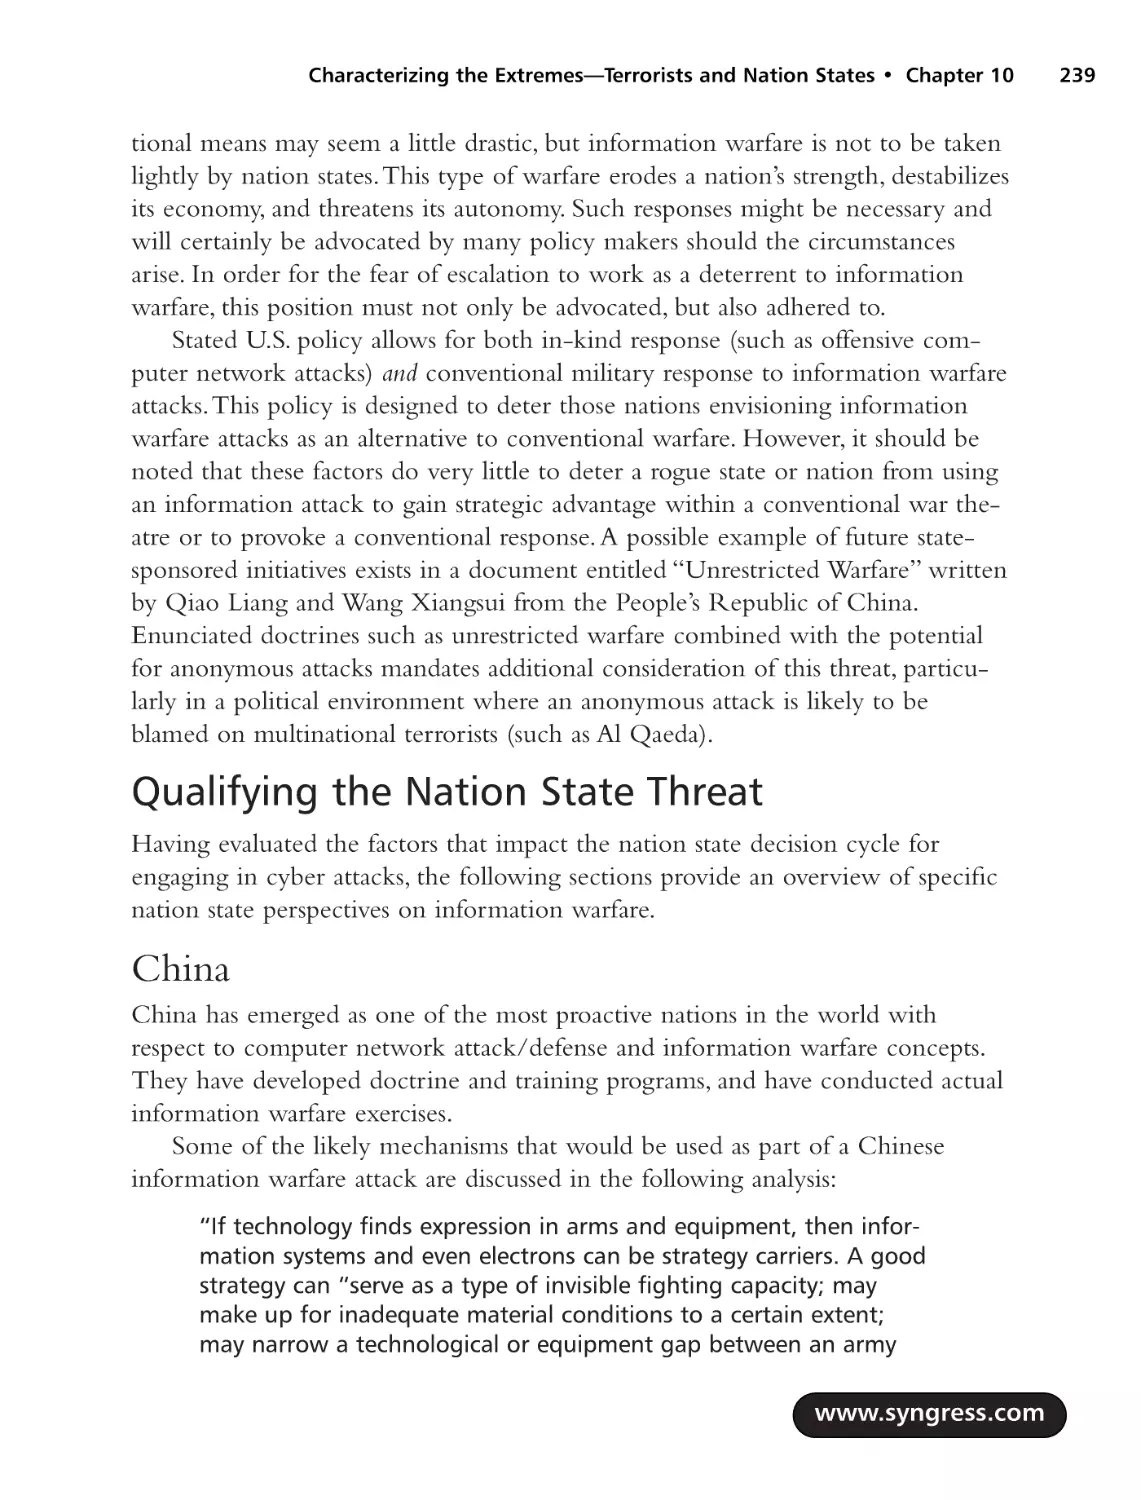 Qualifying the Nation State Threat
China